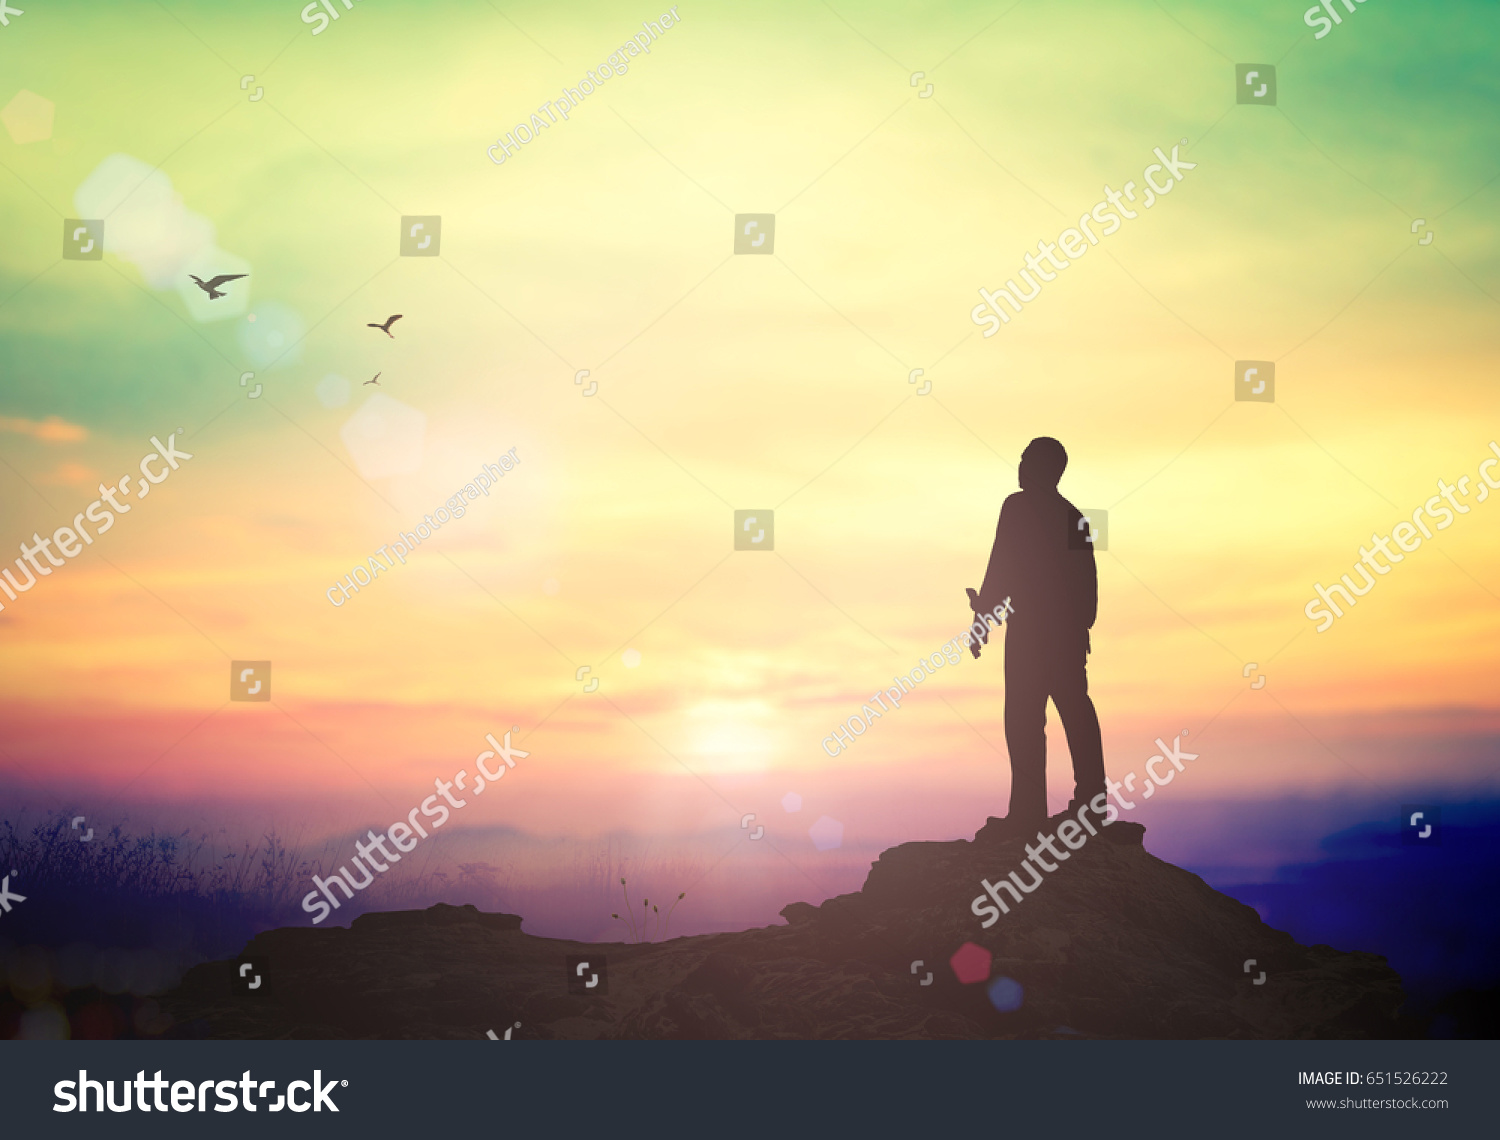 International migrants day concept: Silhouette of humble business man standing on mountain autumn sunset background #651526222